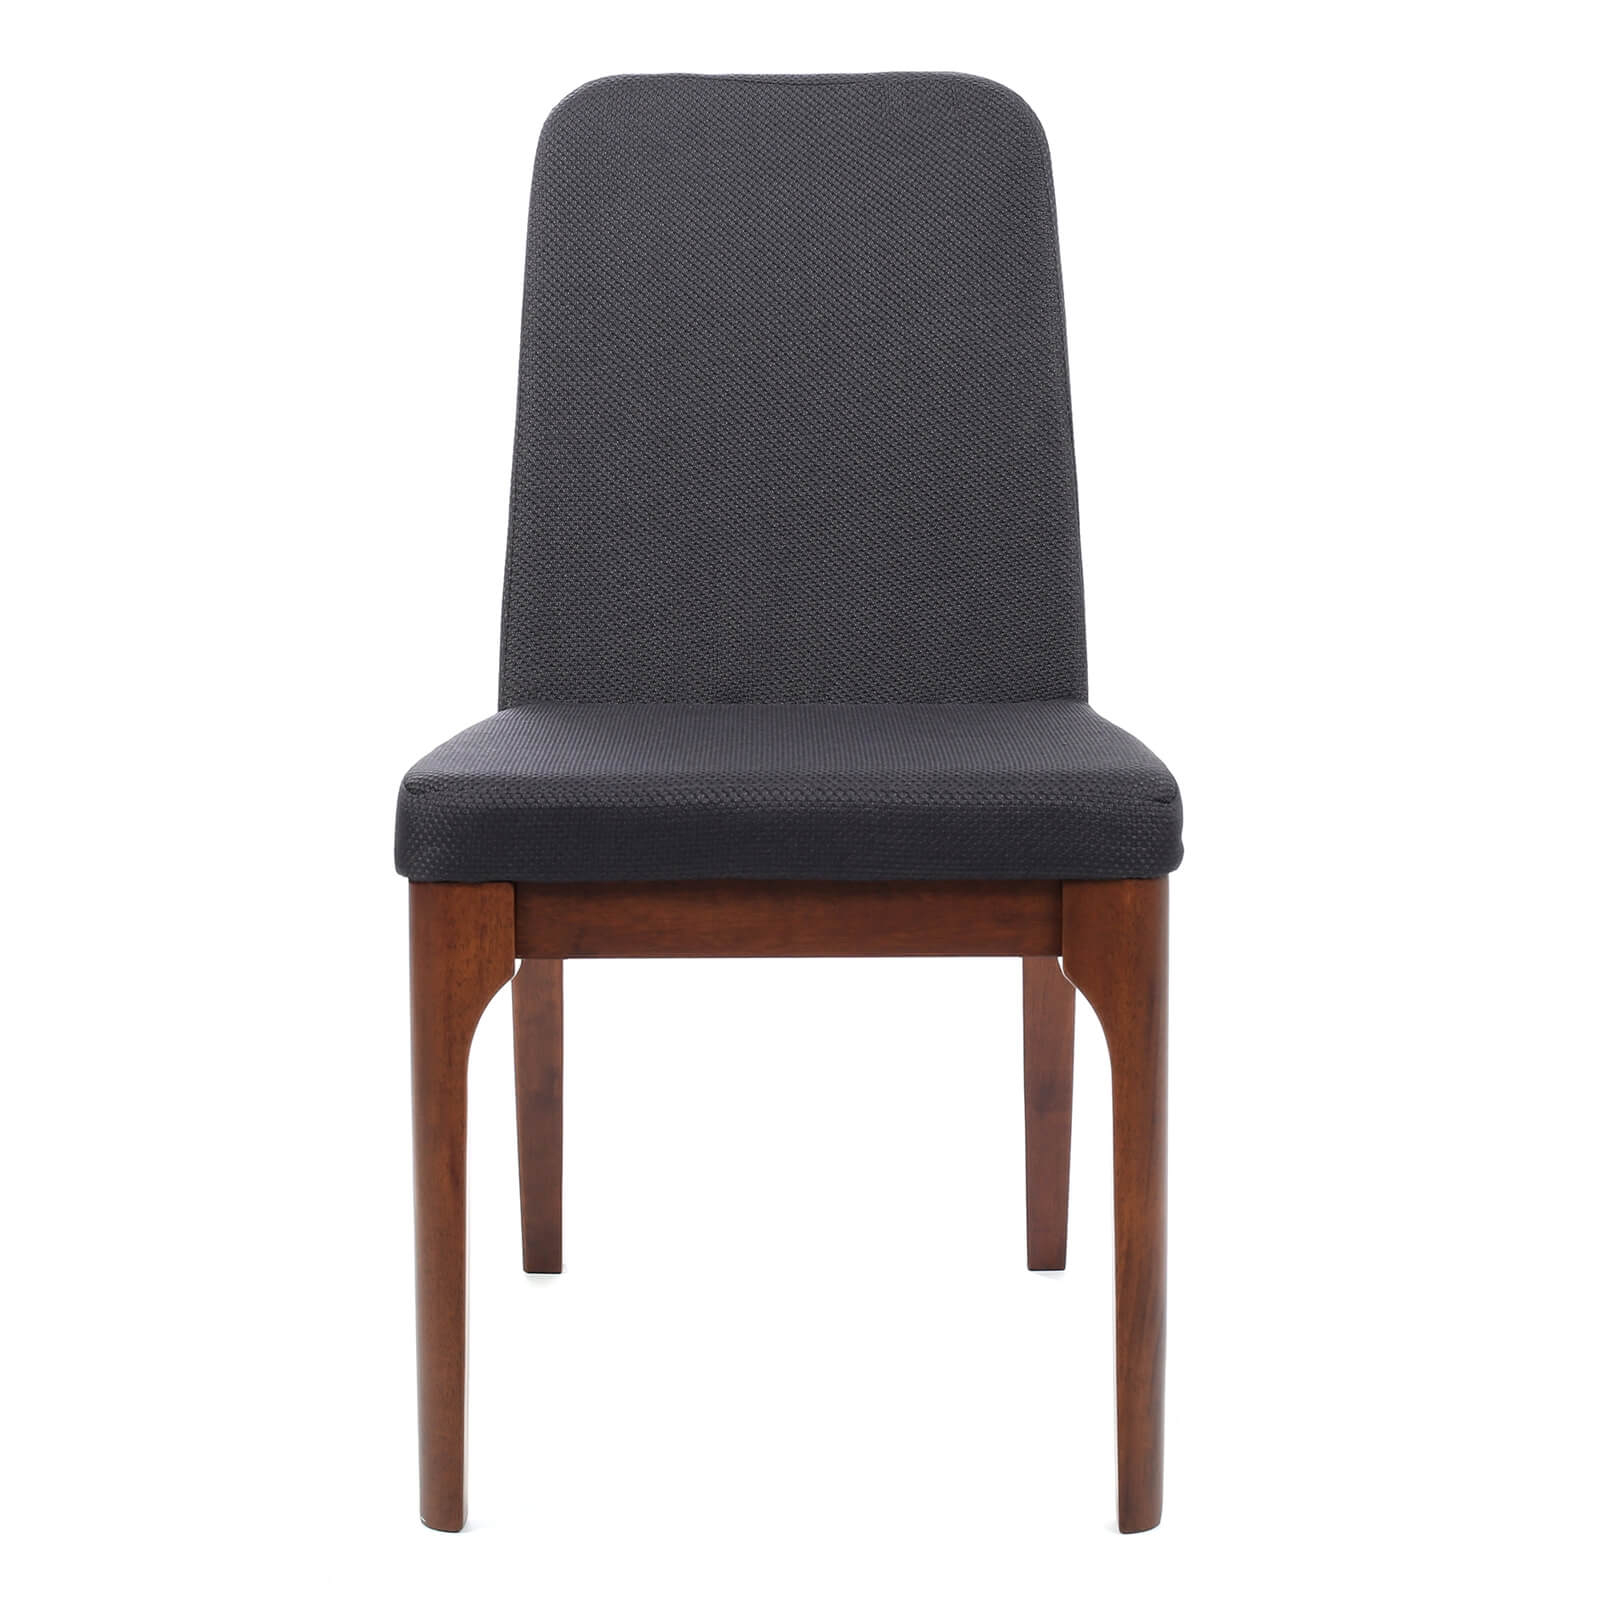 Woven Mesh Dining Chair - Charcoal